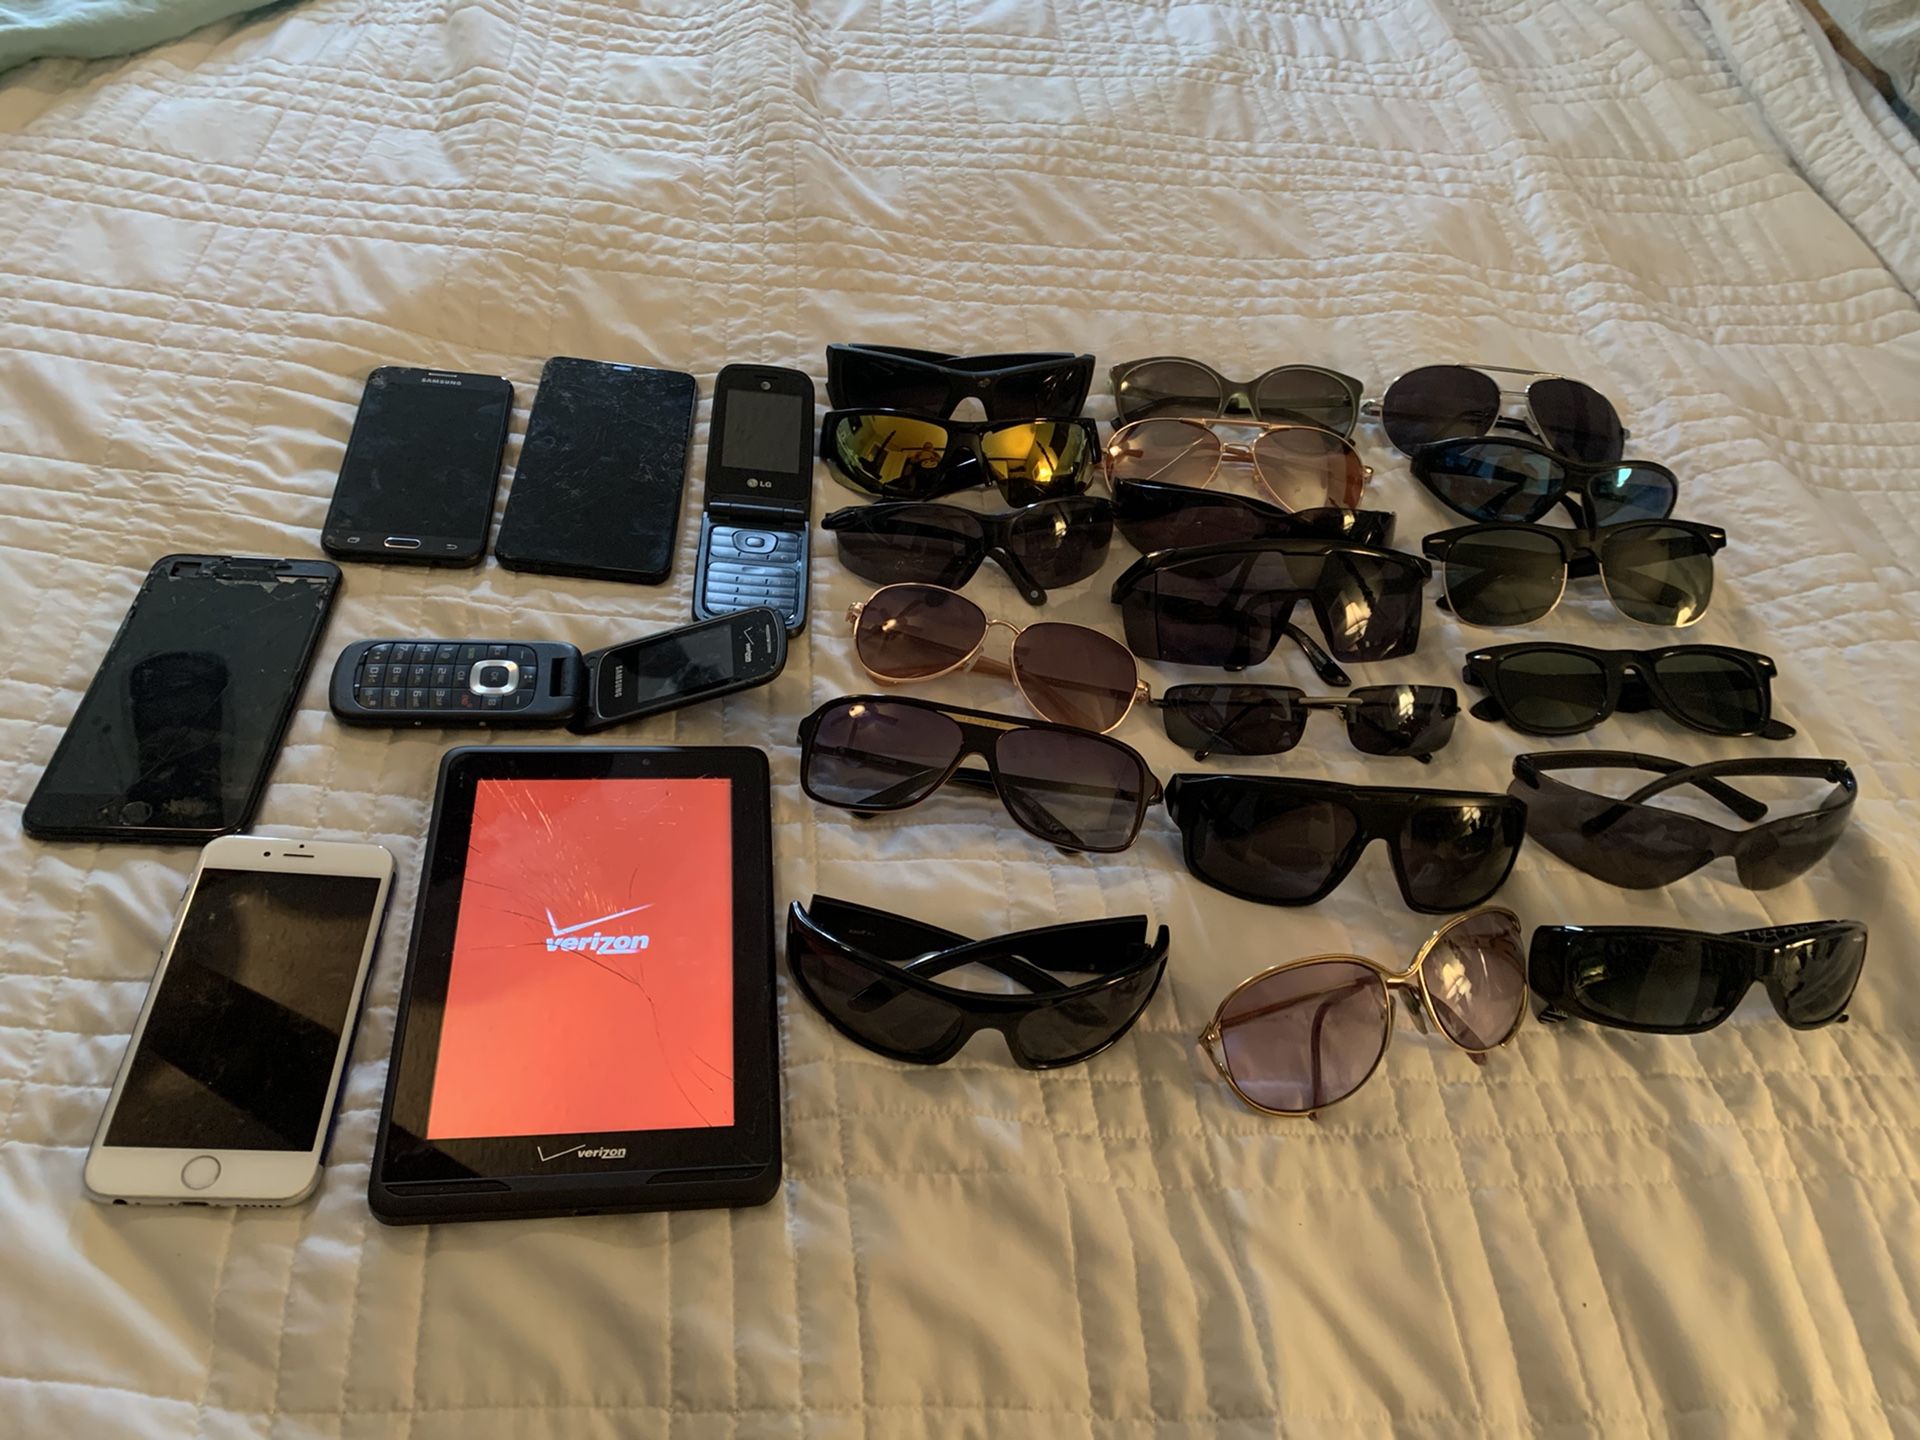 Trade- IPhone 7plus (locked), Iphone6 quit working, LG, Samsung 5, and19 used sunglasses. Some are high end glasses by Arnette, Erron,Bomber,Stache,A